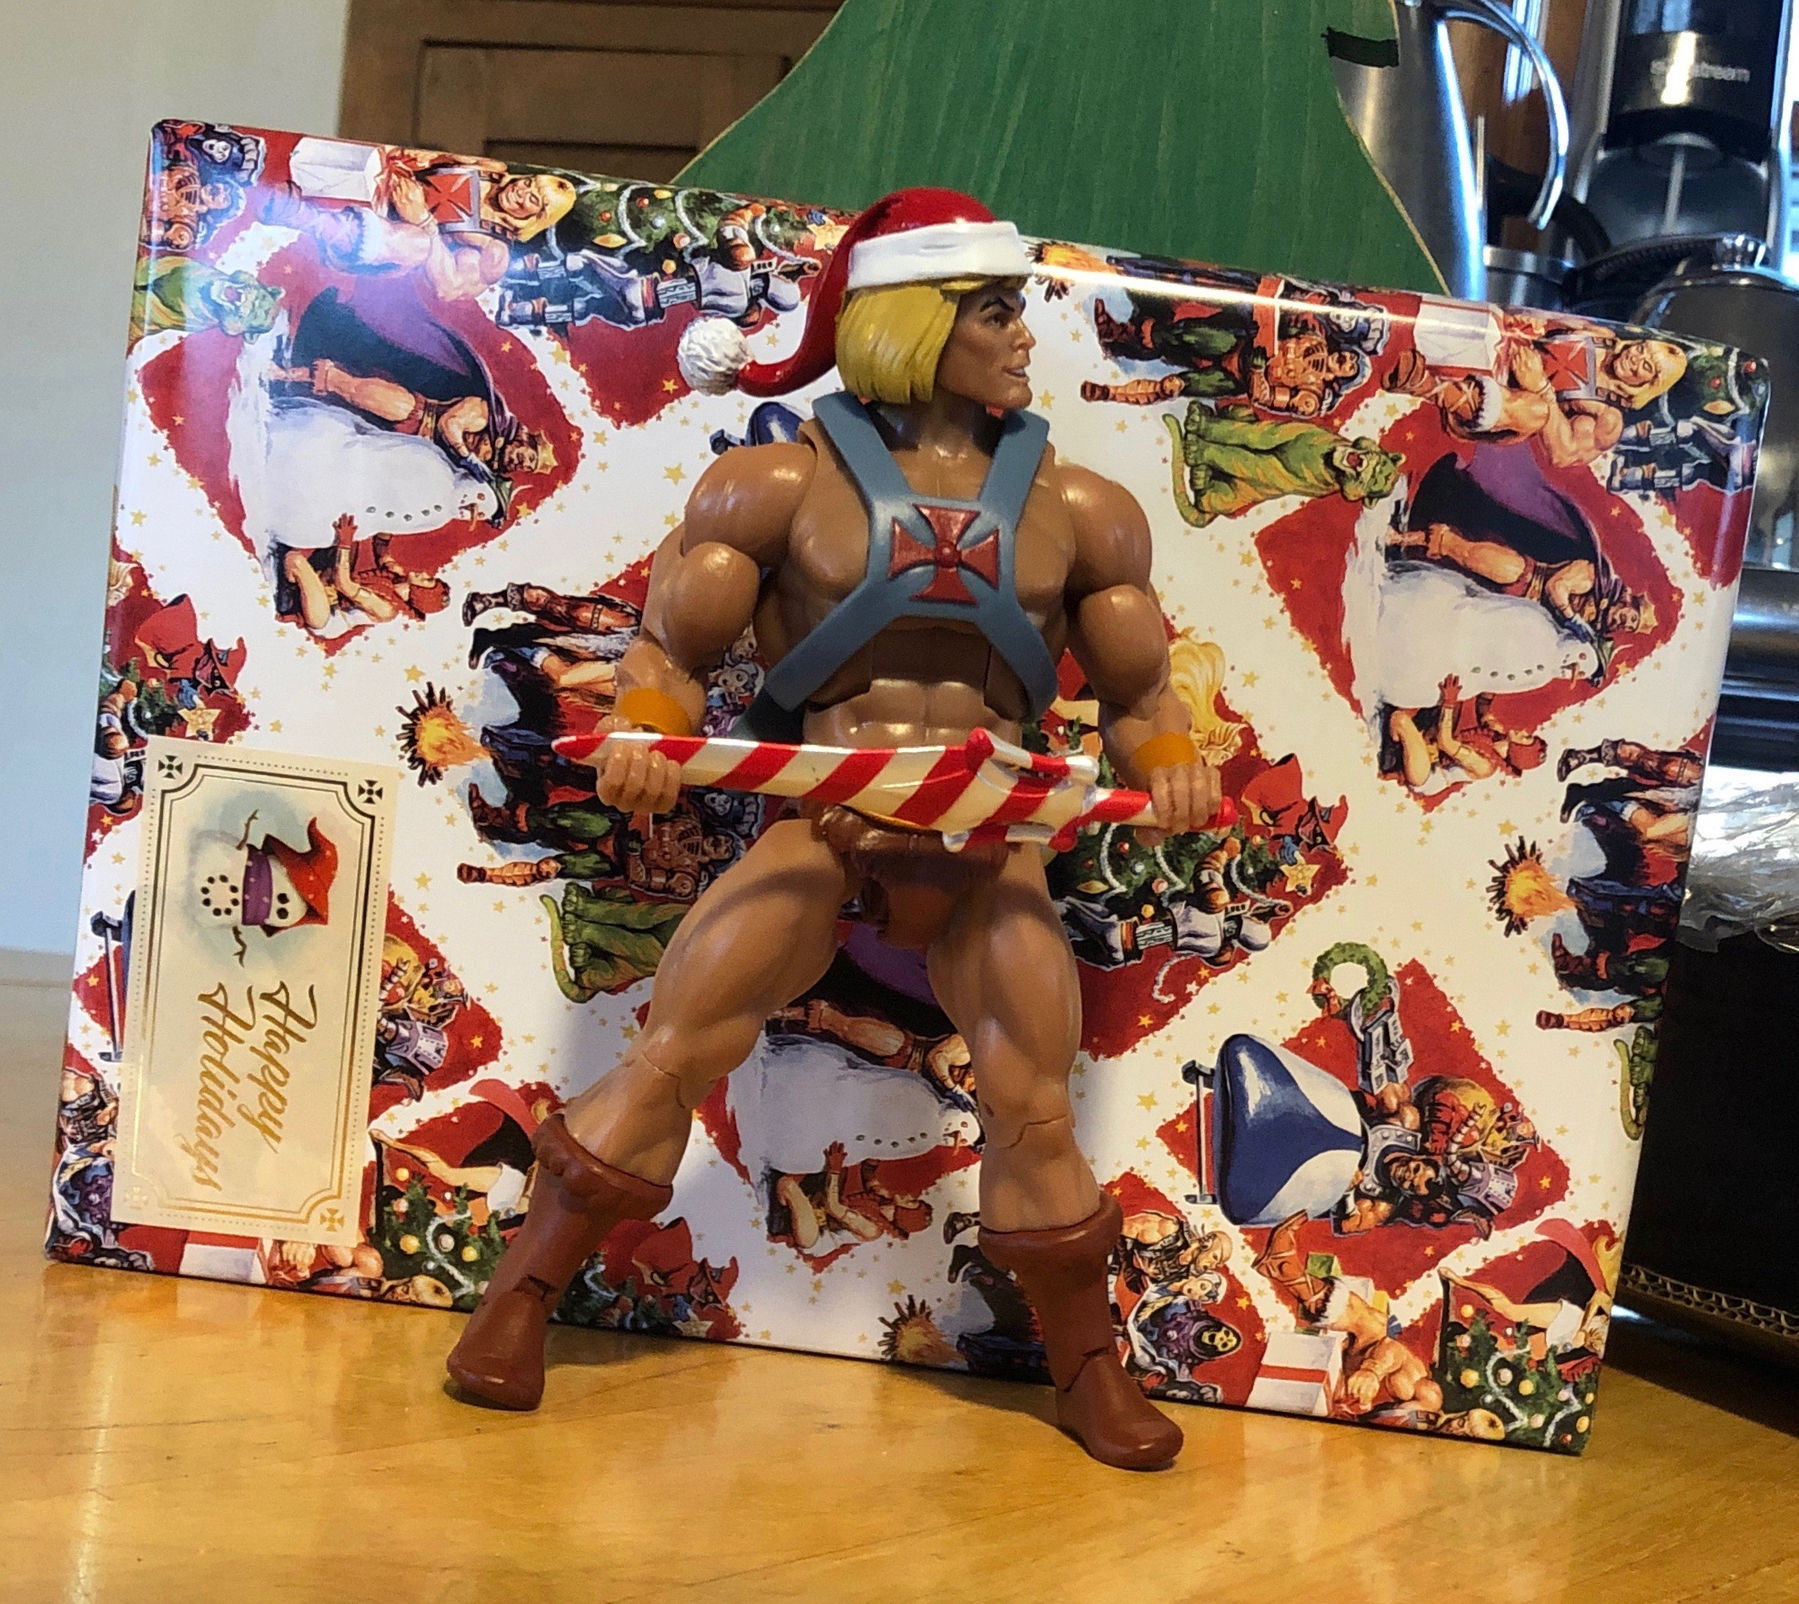 He-Man action figure wearing a Santa hat and holding a candy cane sword in his iconic stance. Behind him is a package wrapped in Masters of the Universe wrapping paper.